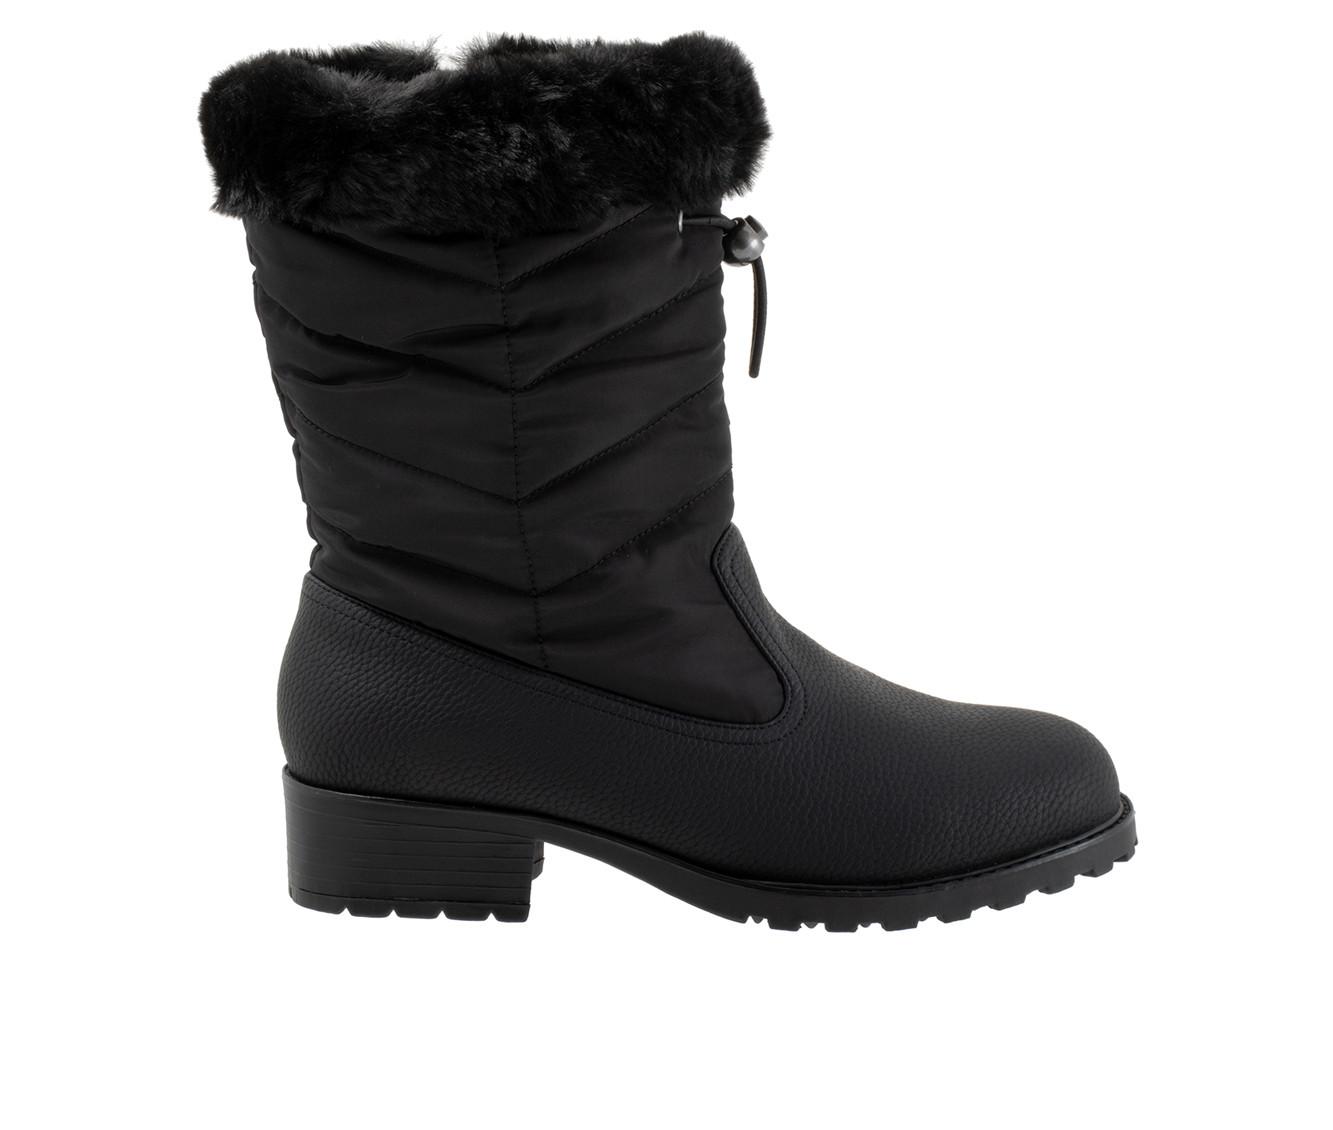 Women's Trotters Bryce Mid Calf Winter Boots